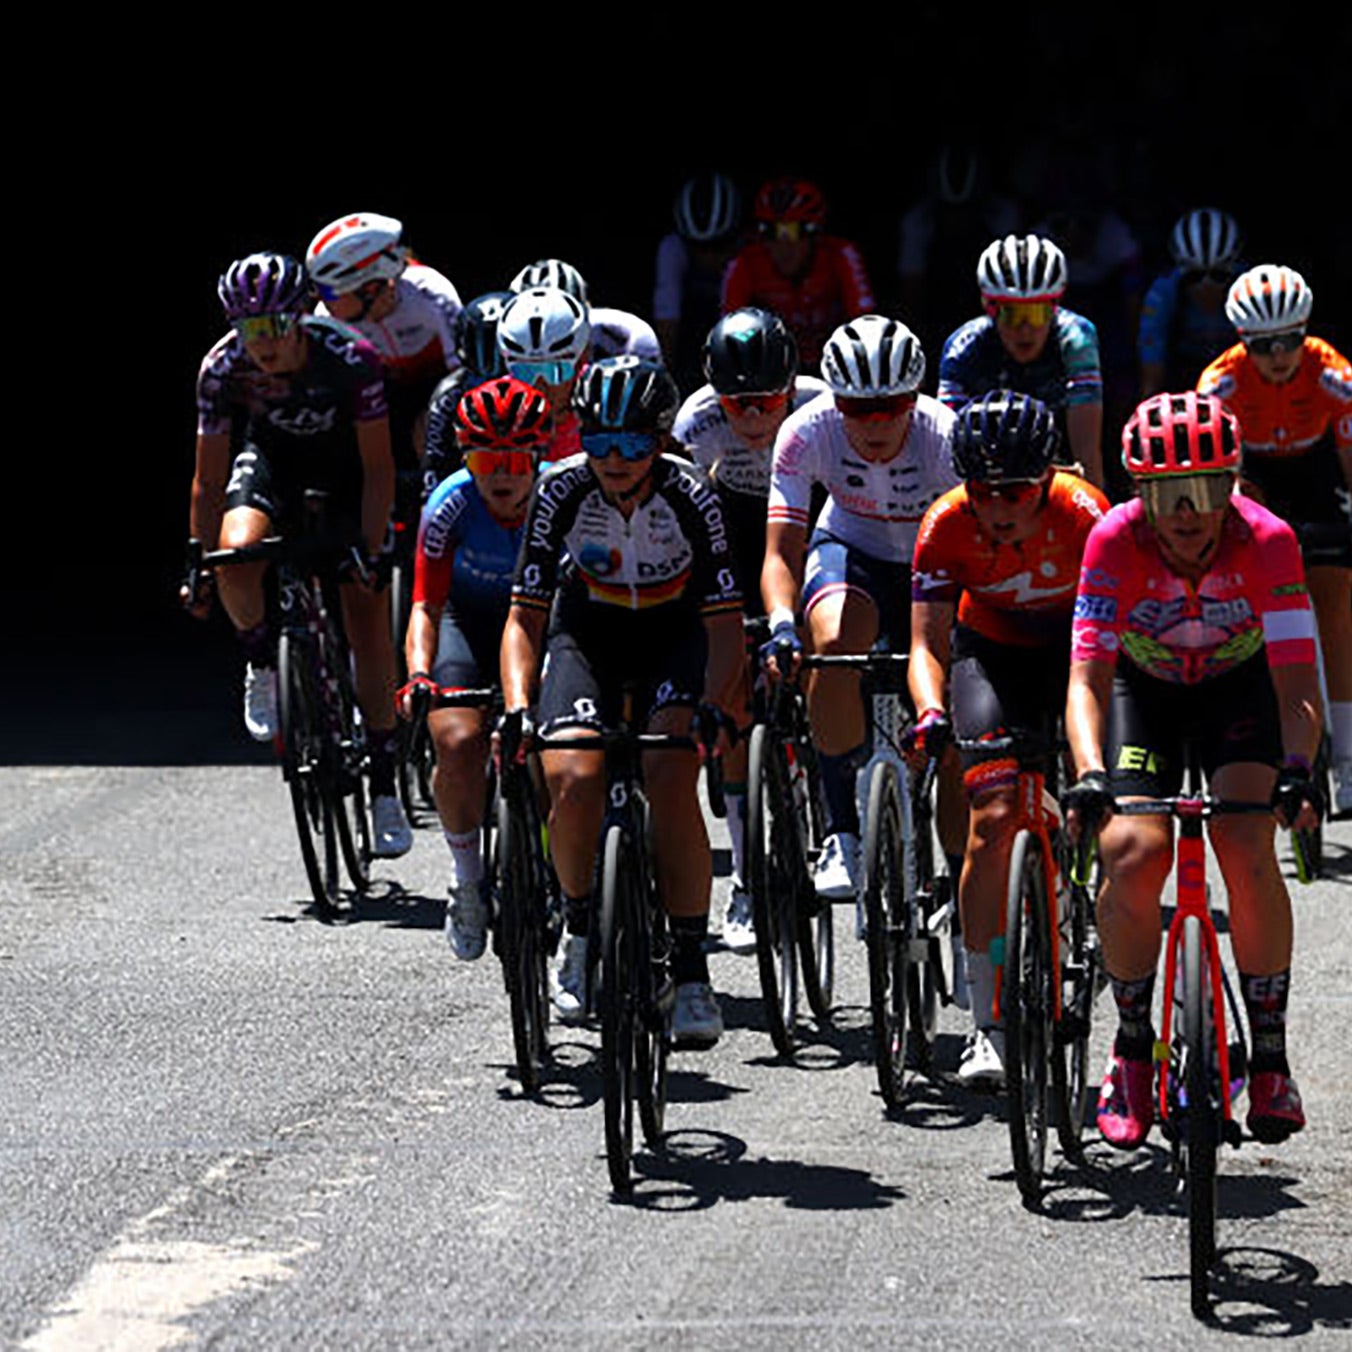 Cyclings Governing Body Banned Transgender Women from Competing in Womens Races